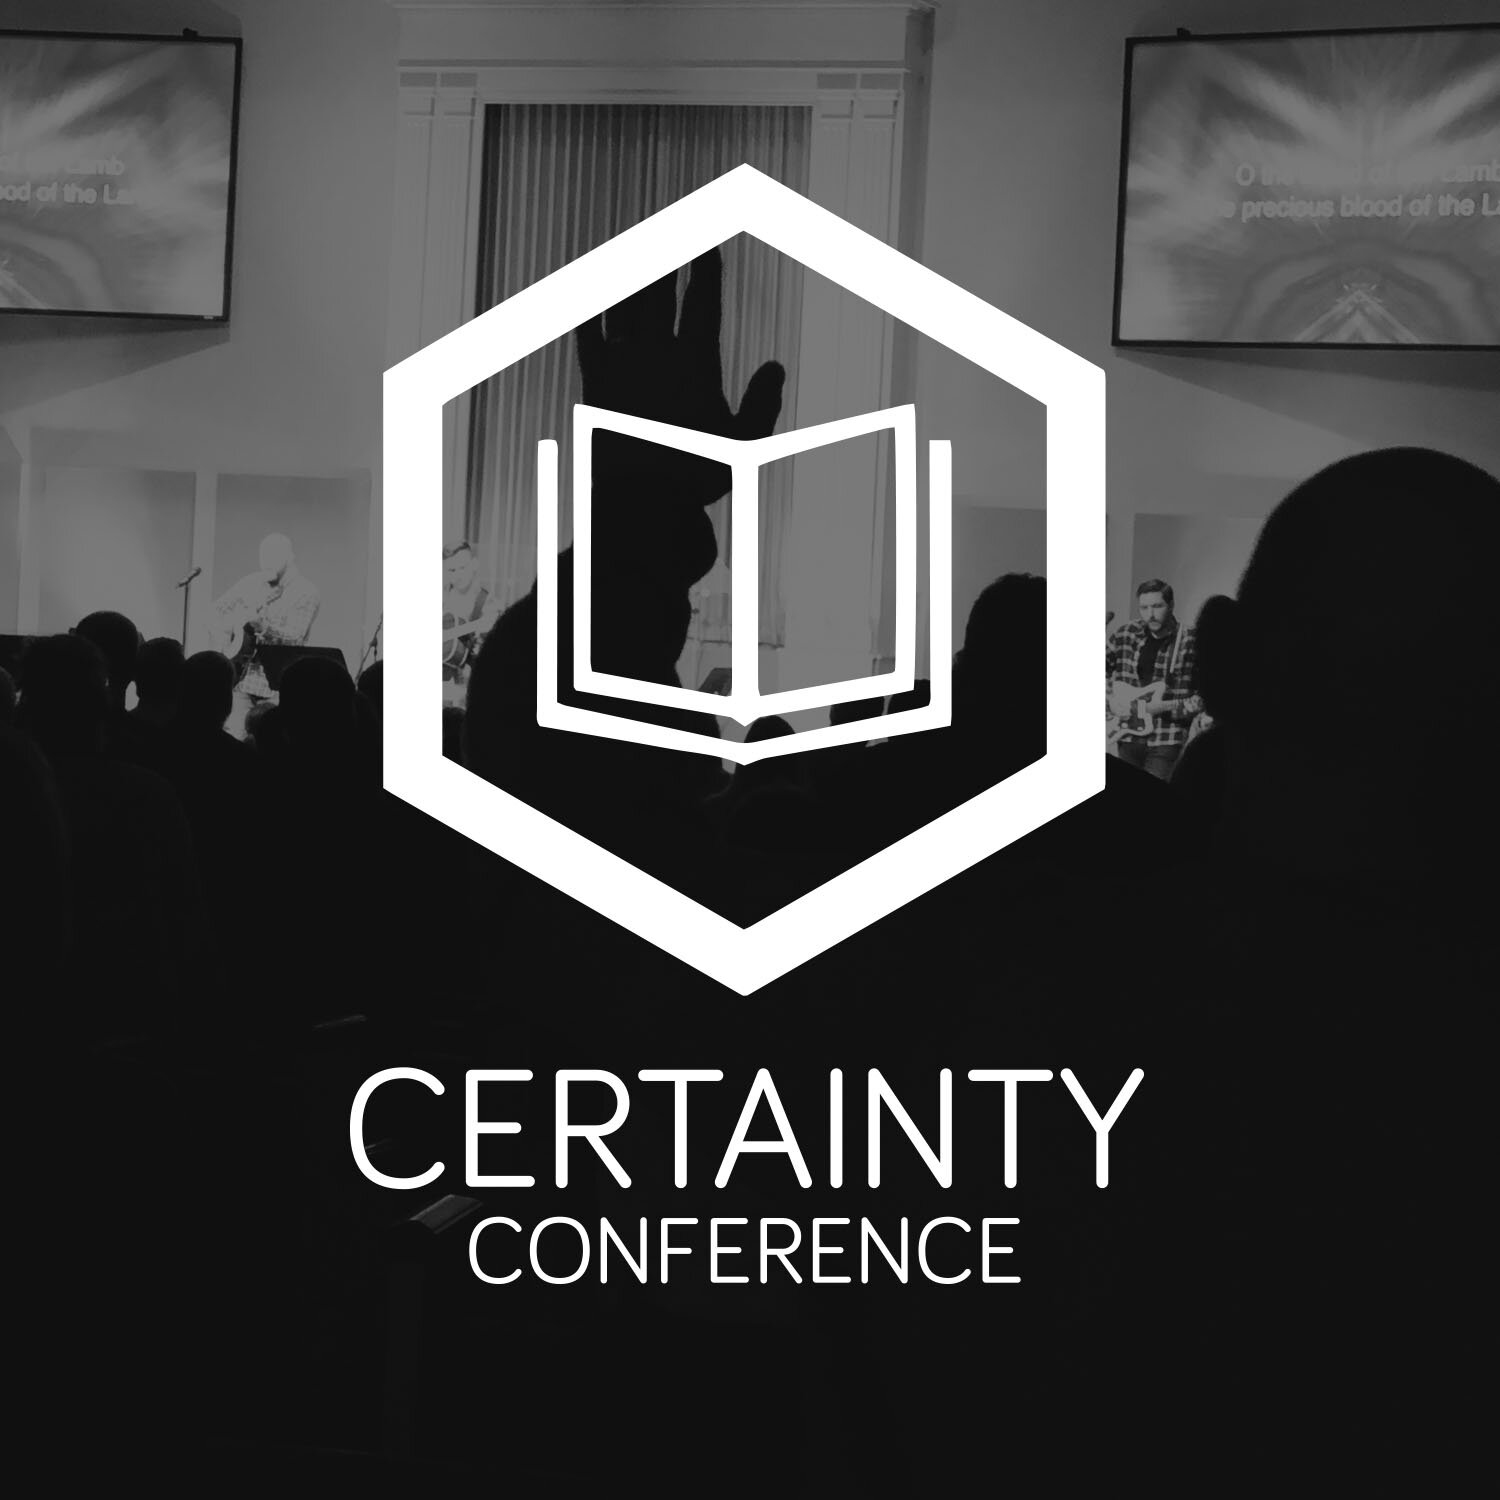 Certainty Conference